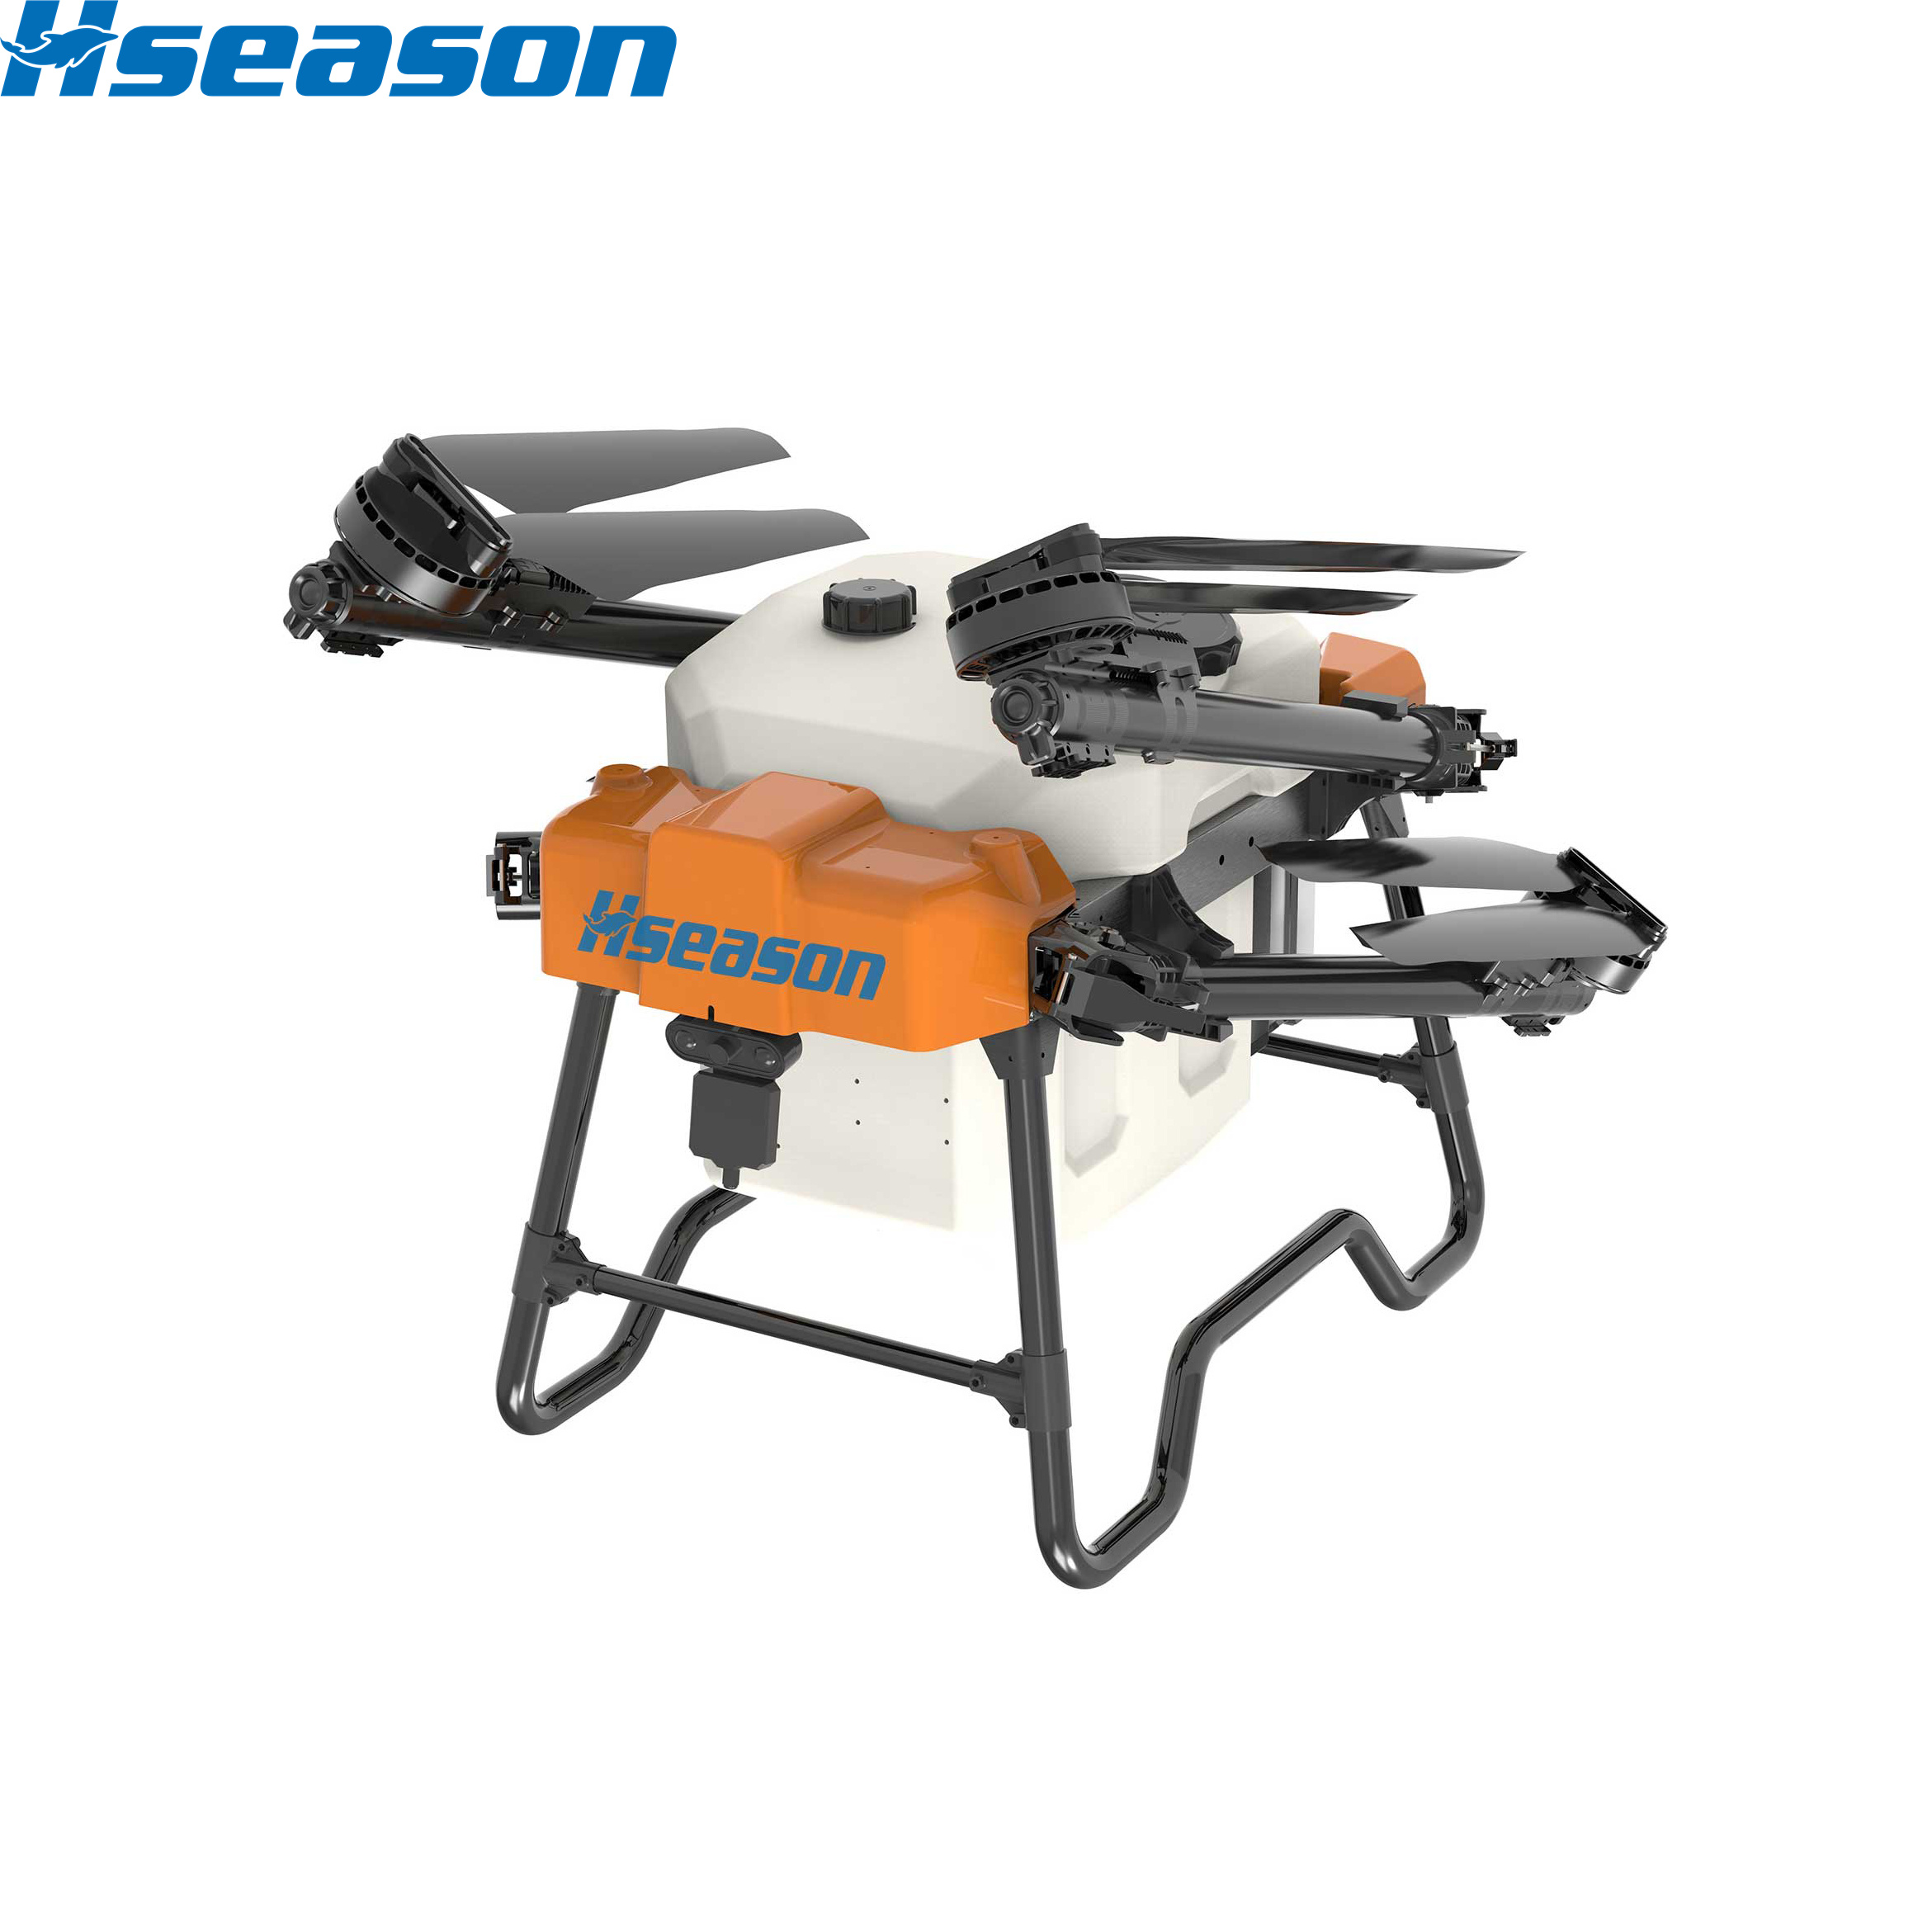 S50 Agricultural Drone